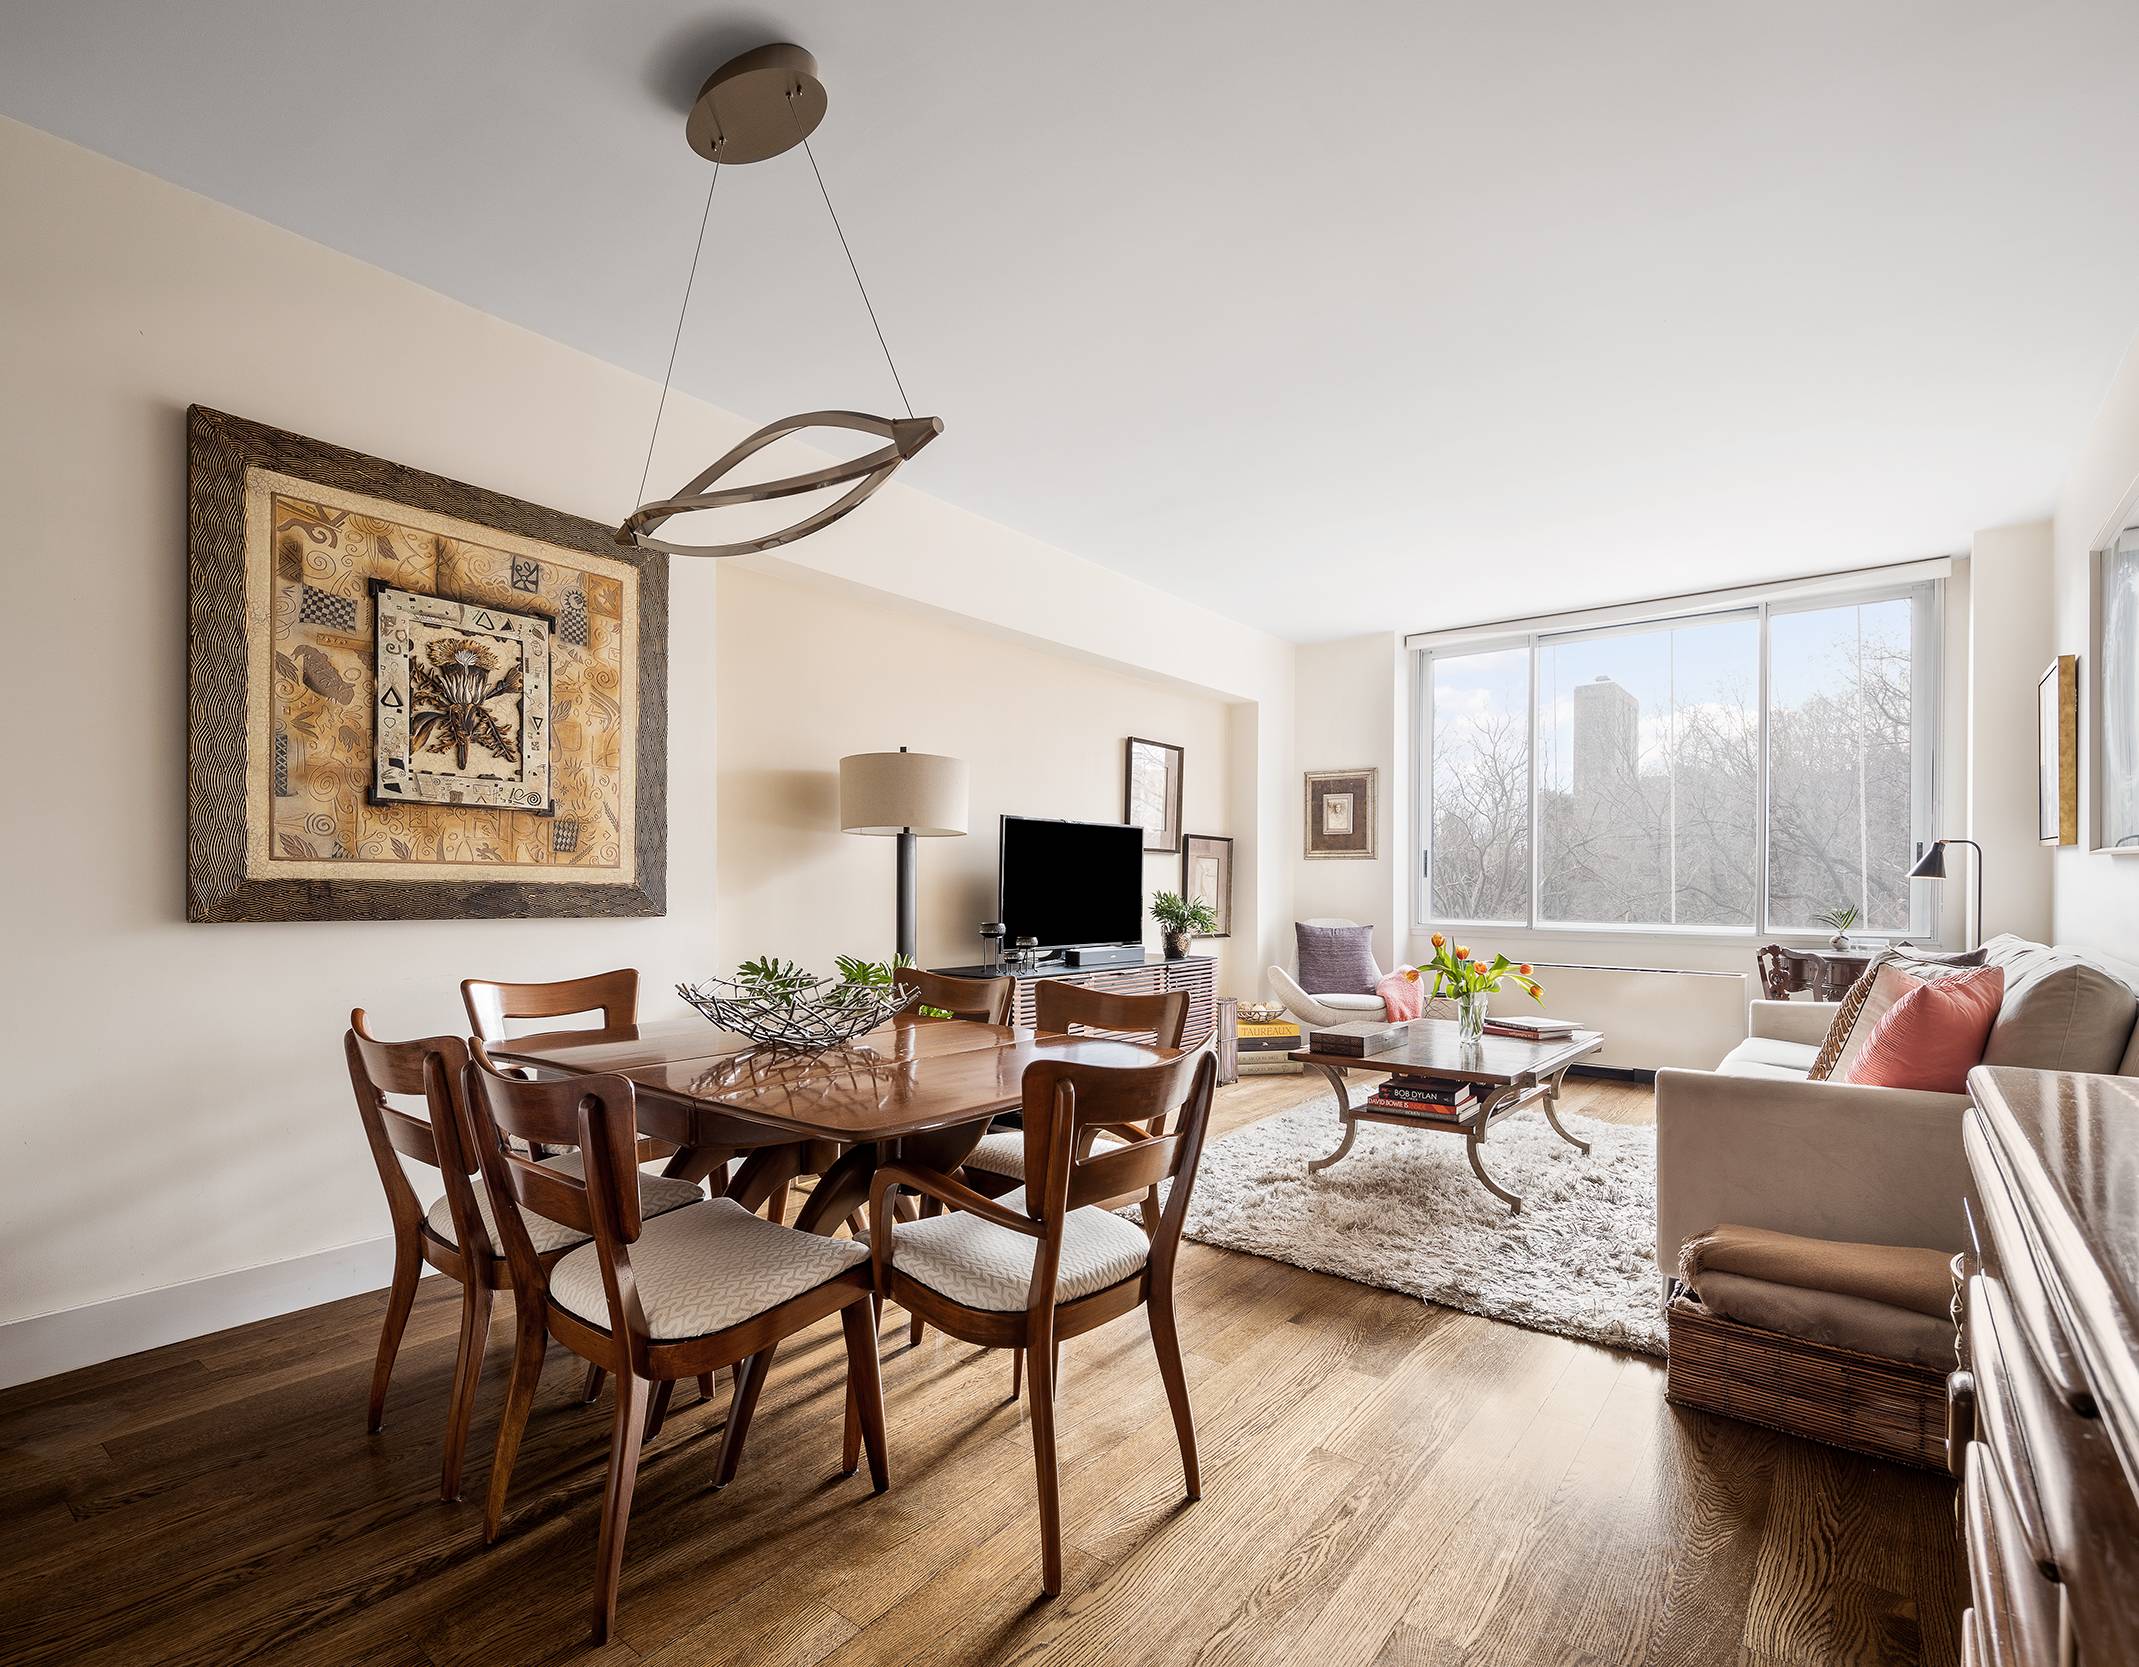 Rarely available 'G' line apartment in one of the most desirable full service buildings on the Upper West Side, The Park Belvedere.